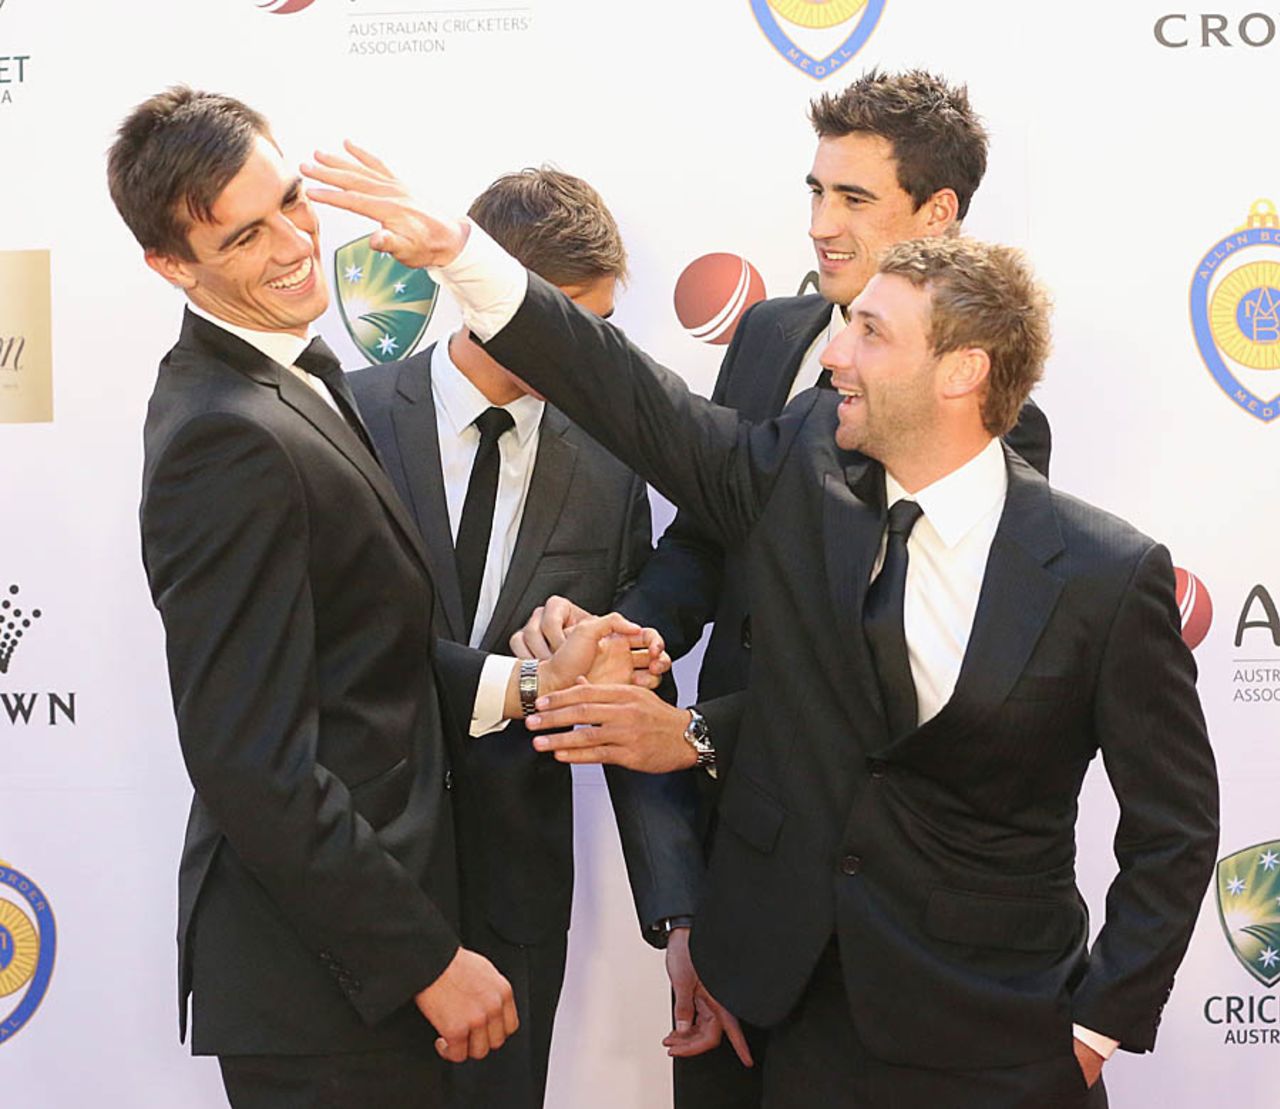 Phillip Hughes, Pat Cummins and Mitchell Starc at the Allan Border Medal awards ceremony, Melbourne, February 4, 2013